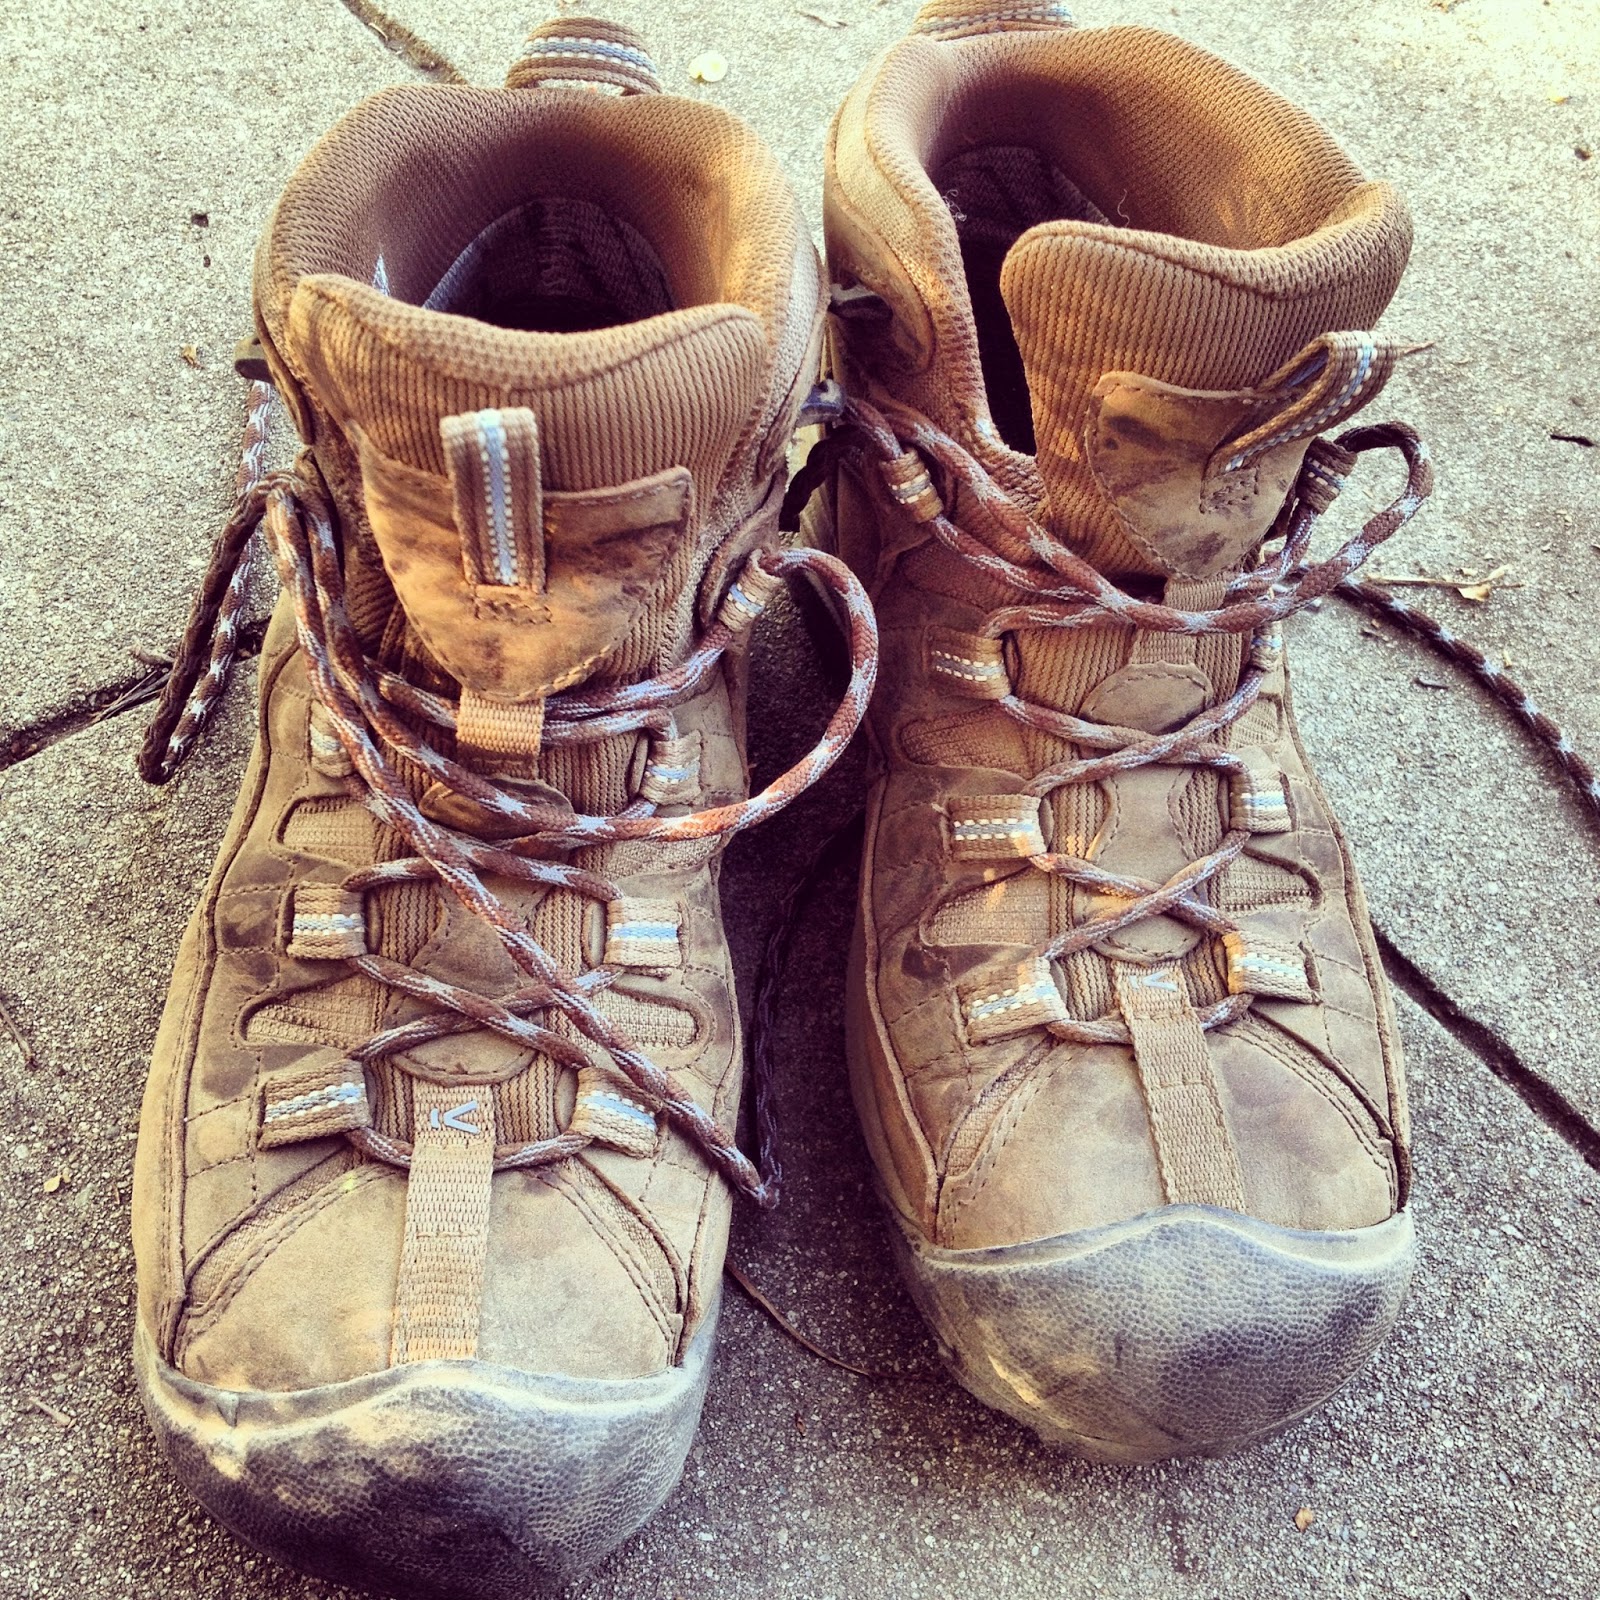 hiking essentials: 5 tips to help you find your new hiking boot